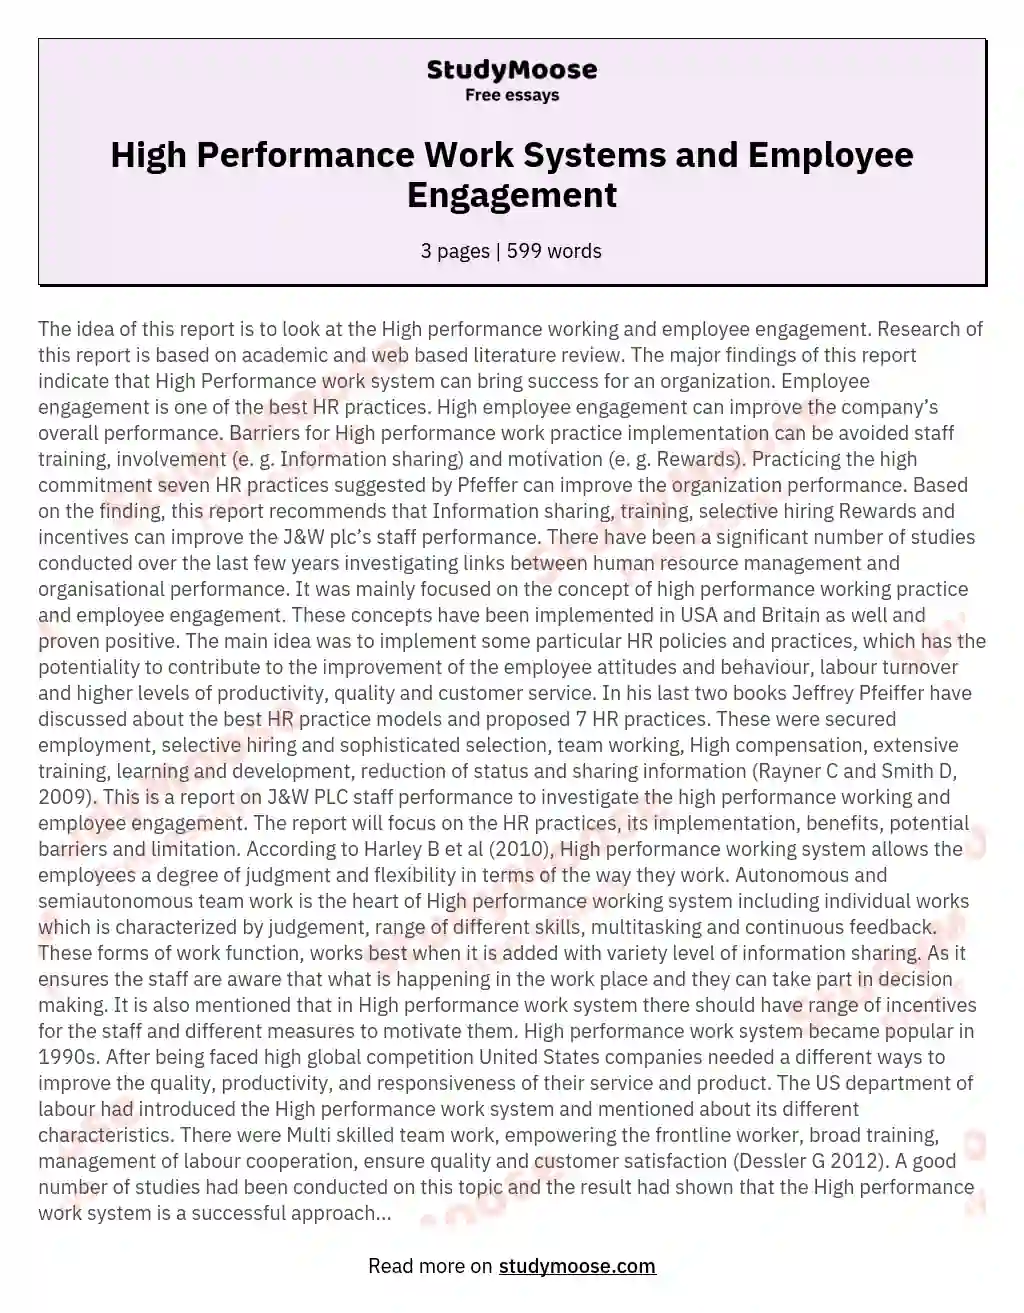 High Performance Work Systems and Employee Engagement essay